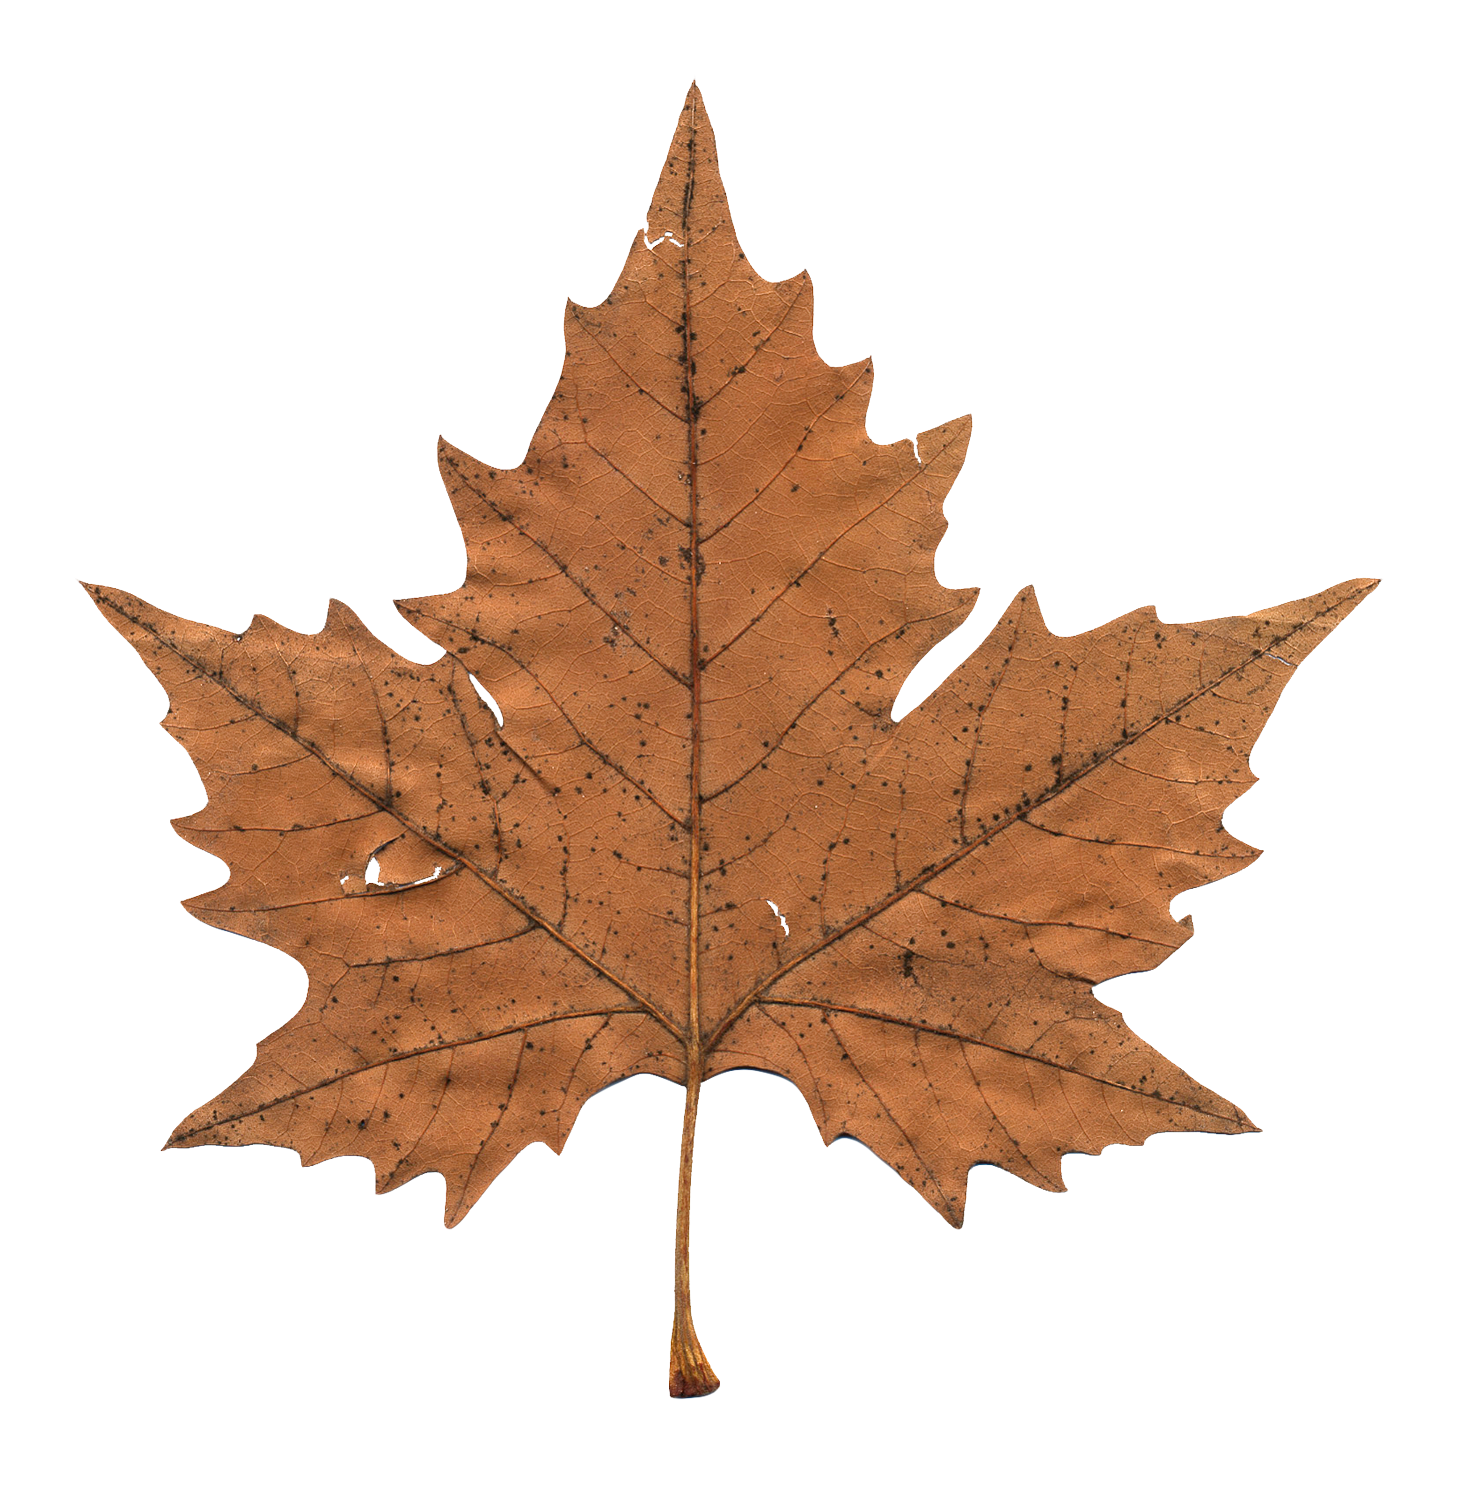 maple leaf. Available formats